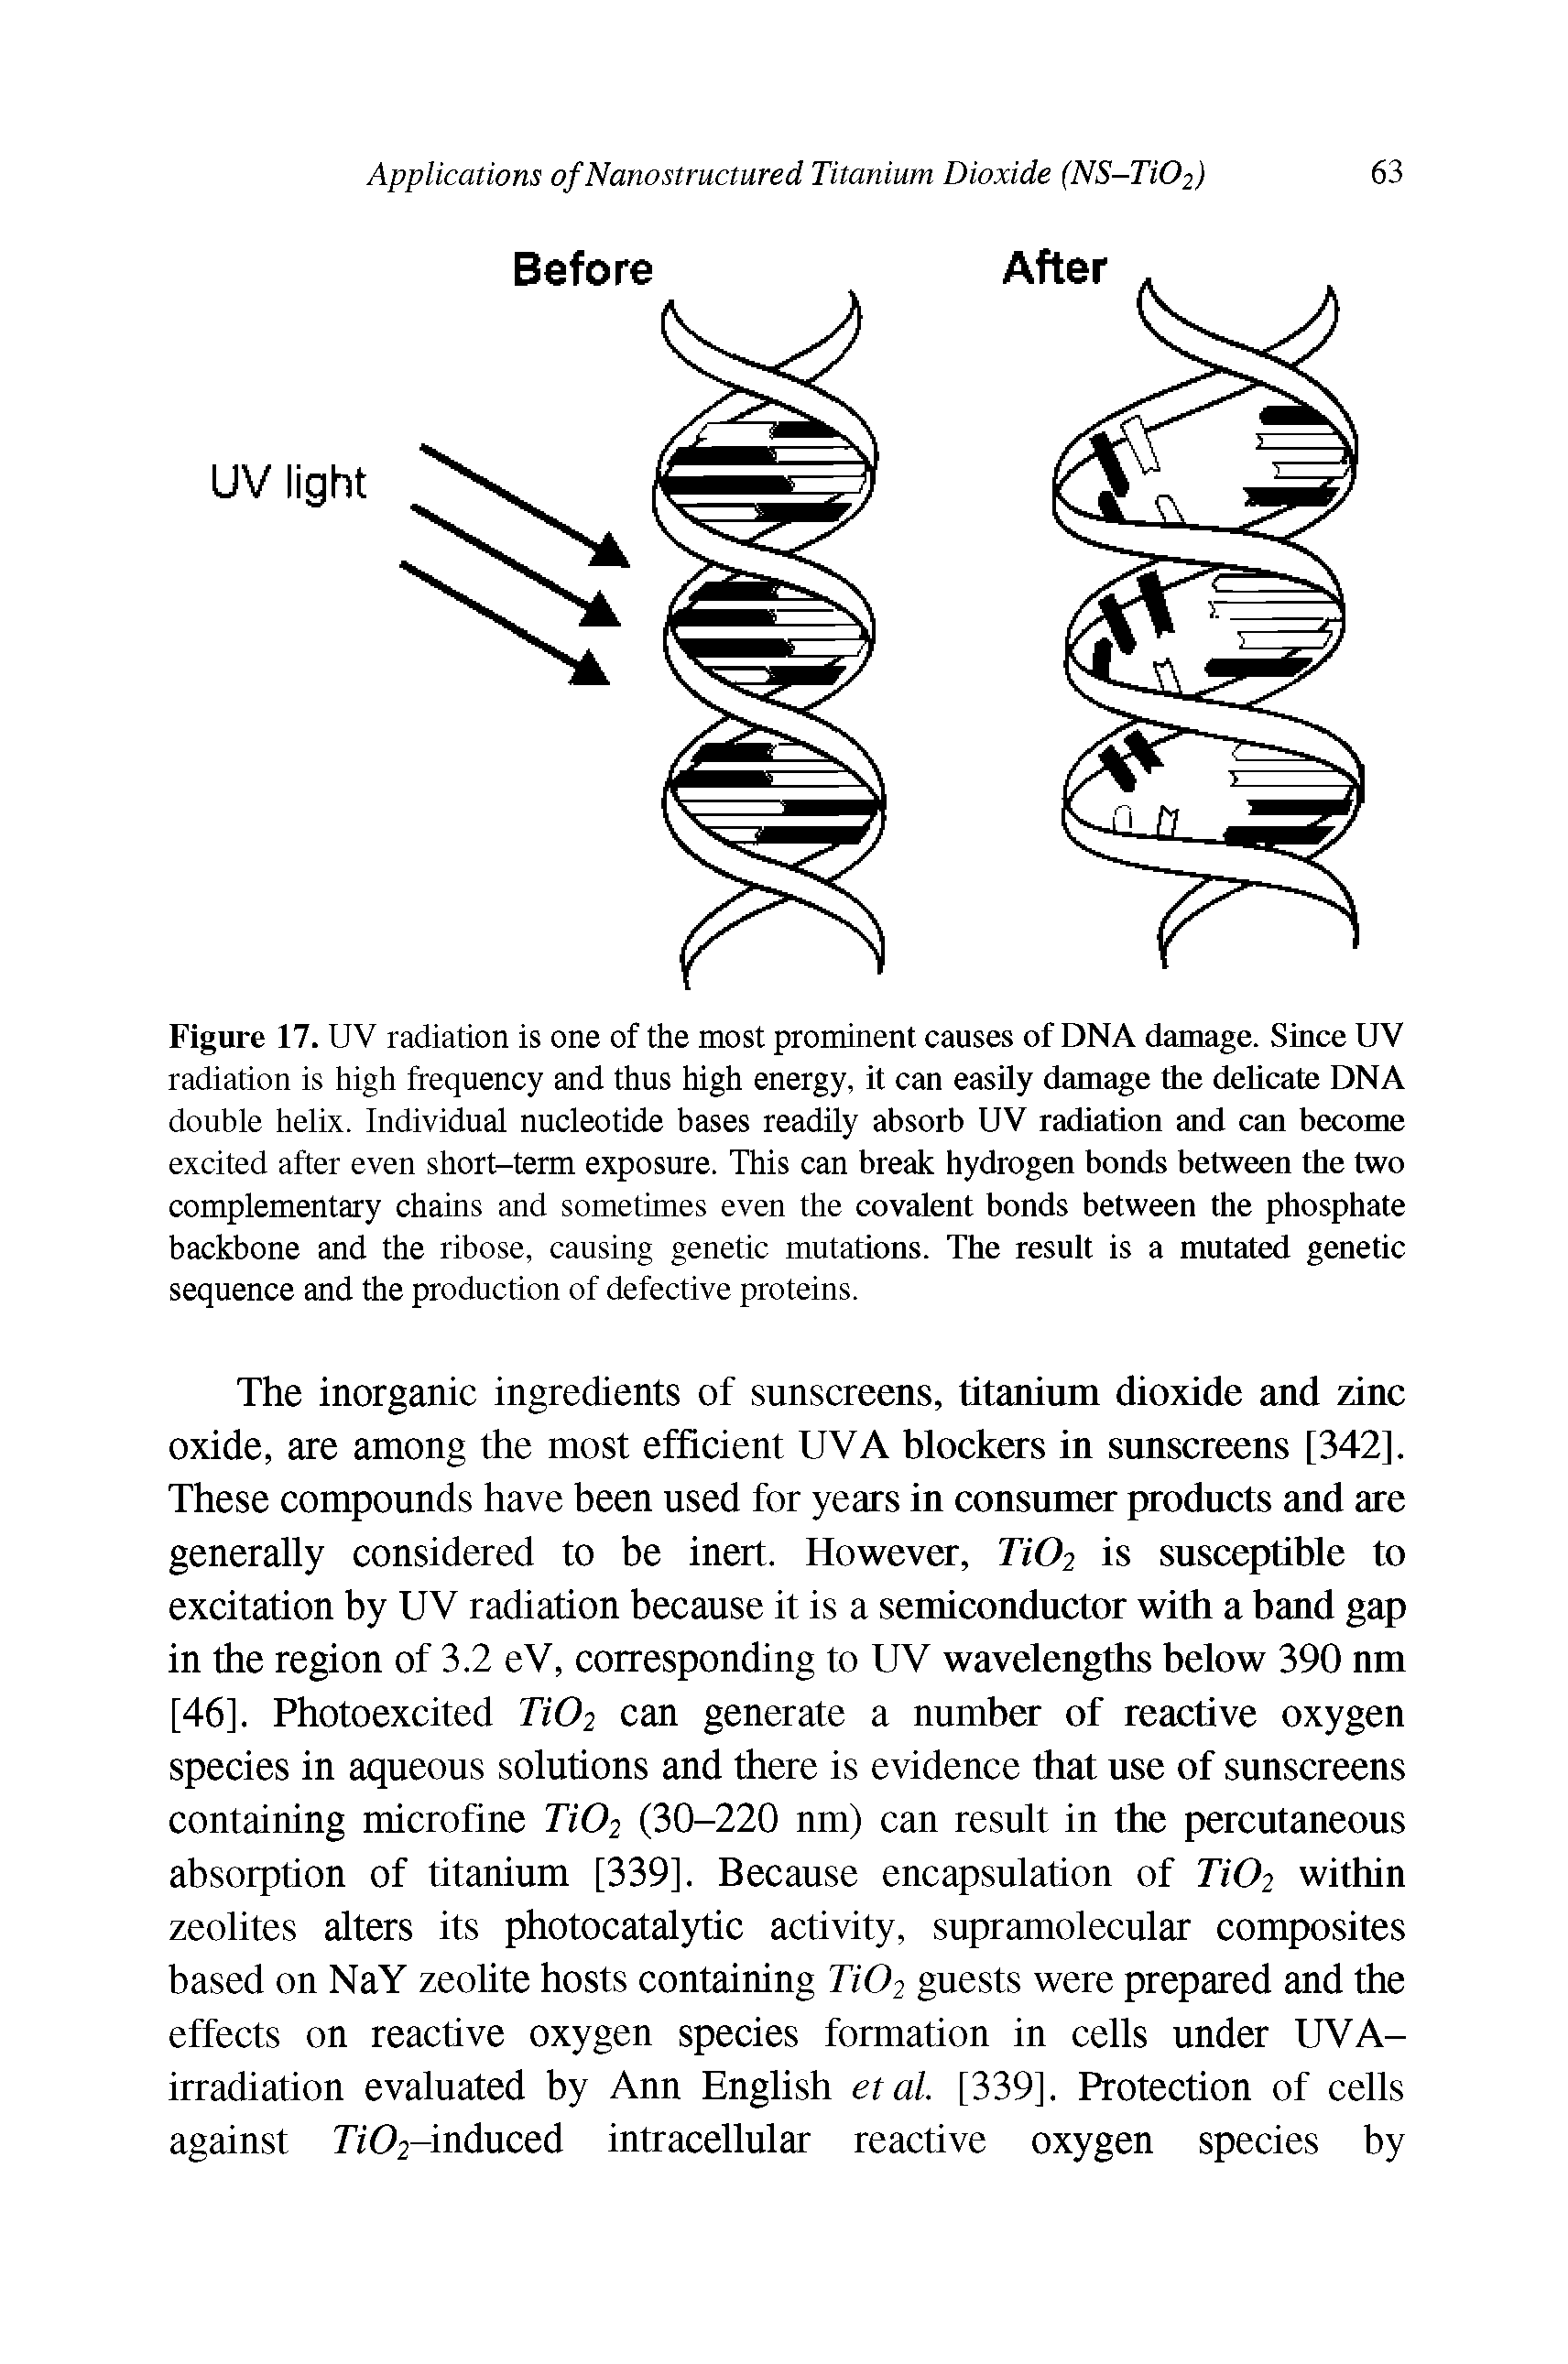 Figure 17. UV radiation is one of the most prominent causes of DNA damage. Since UV radiation is high frequency and thus high energy, it can easUy damage the delicate DNA double helix. Individual nucleotide bases readily absorb UV radiation and can become excited after even short-term exposure. This can break hydrogen bonds between the two complementary chains and sometimes even the covalent bonds between the phosphate backbone and the ribose, causing genetic mutations. The result is a mutated genetic sequence and the production of defective proteins.